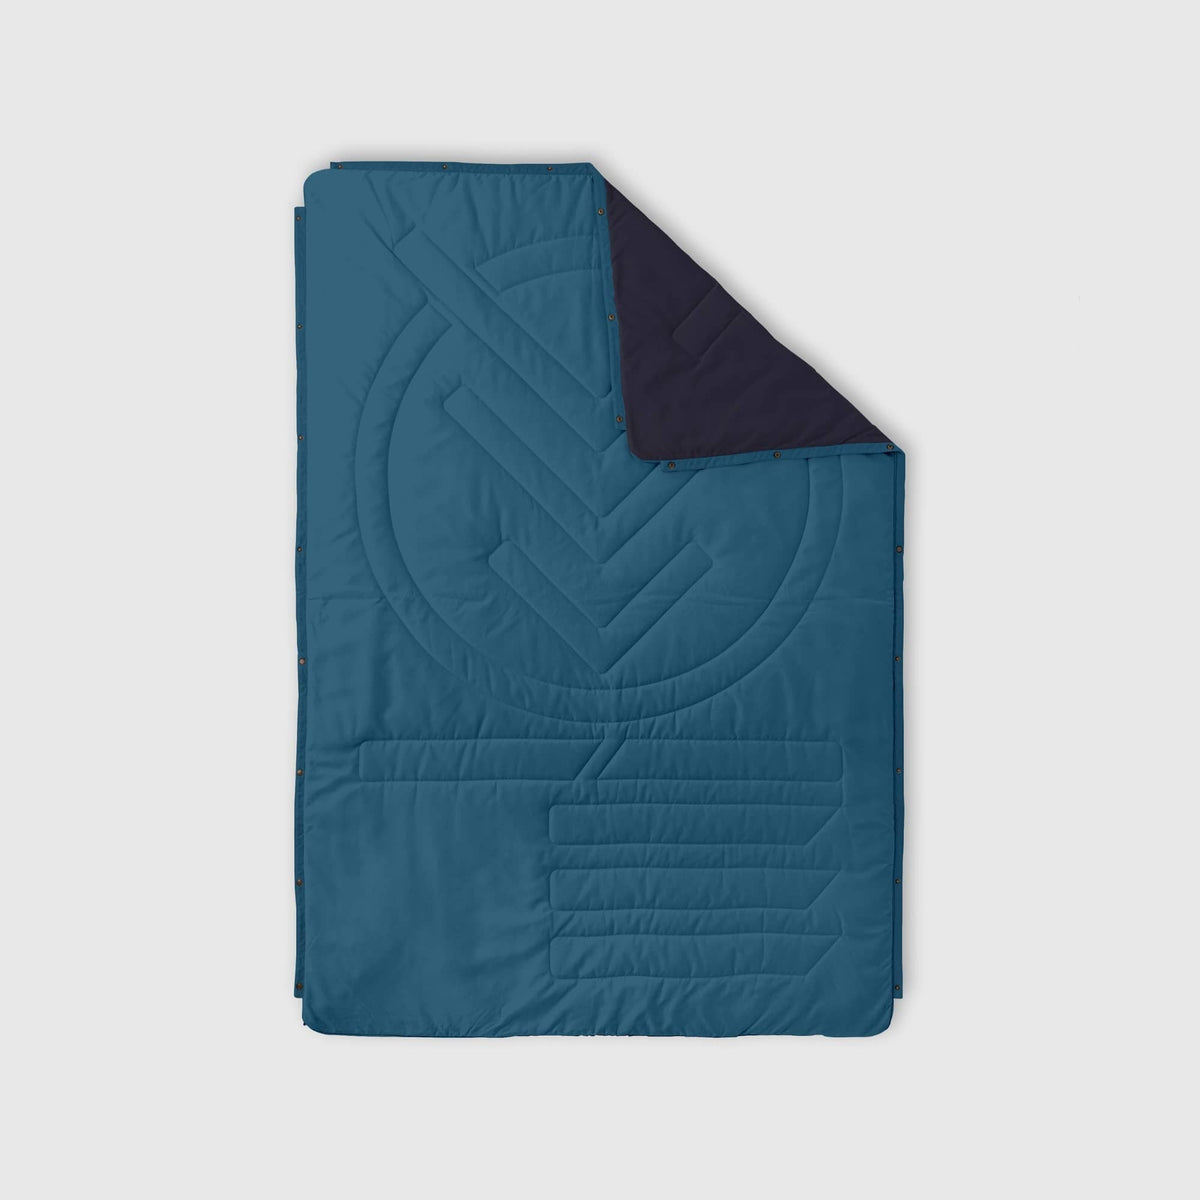 VOITED Recycled Ripstop Outdoor Camping Blanket - Blue Steel / Graphite